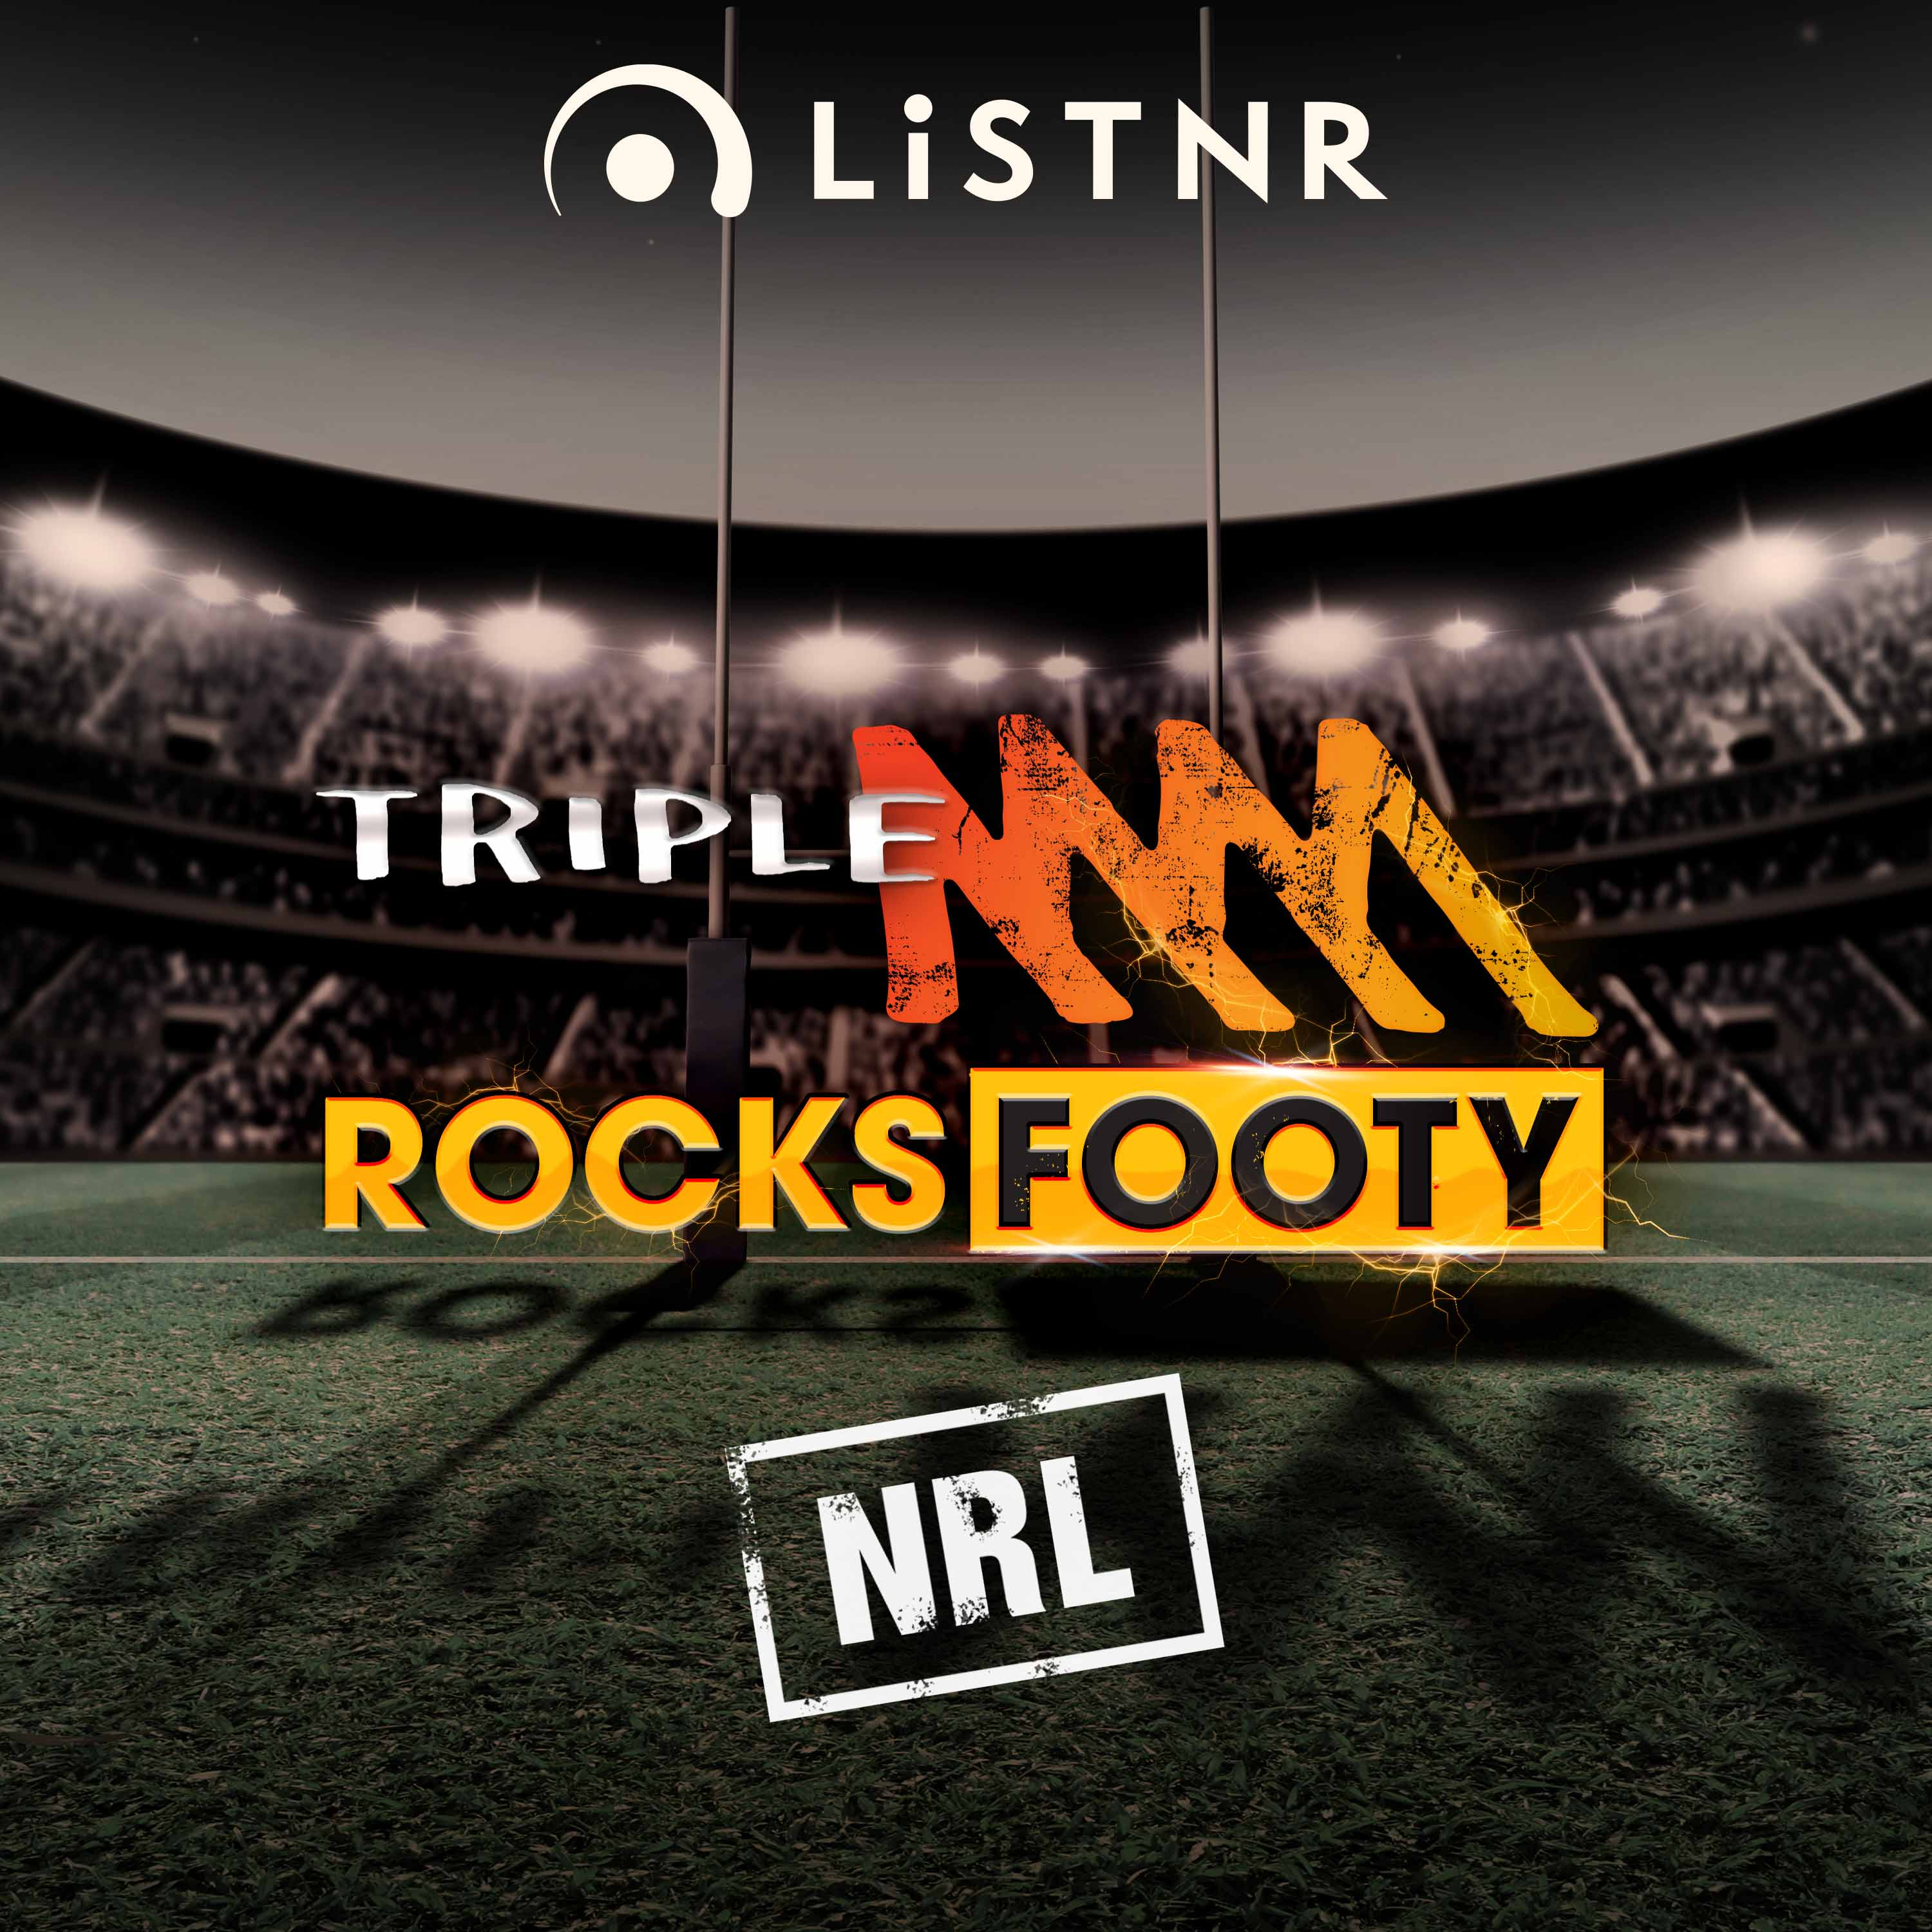 Saturday Scrum Hour 3 | The Scariest NRL Players, Cleary A Lock To Win Dally M & Sterlo's Takeaways From The Round